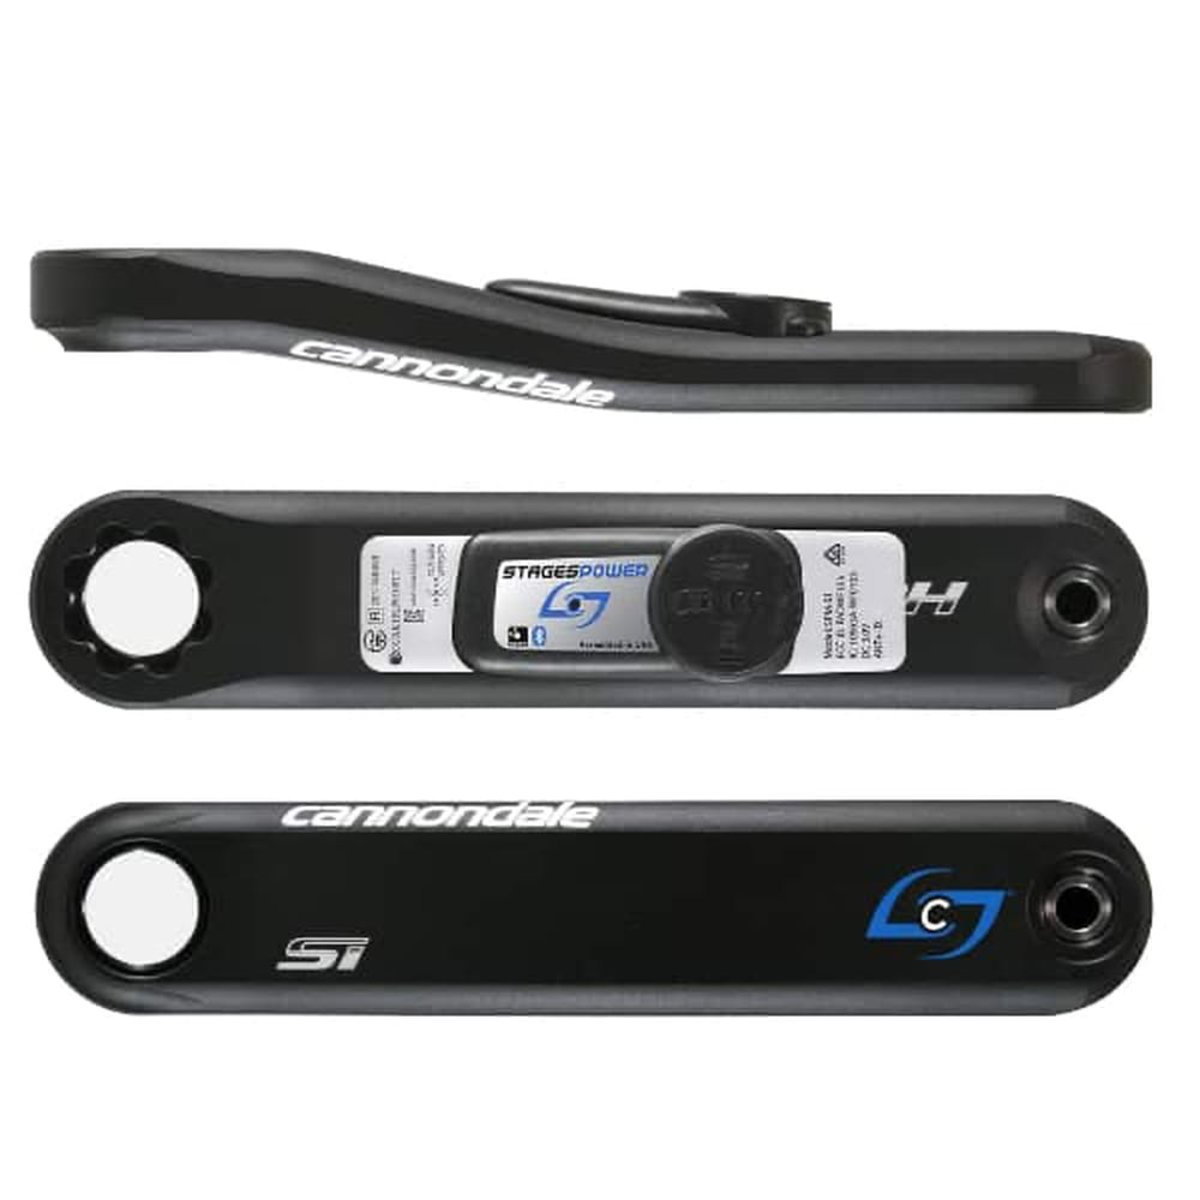 Вимірювач потужності STAGES Cycling Power Meter L Cannondale Si HG 175mm фото 